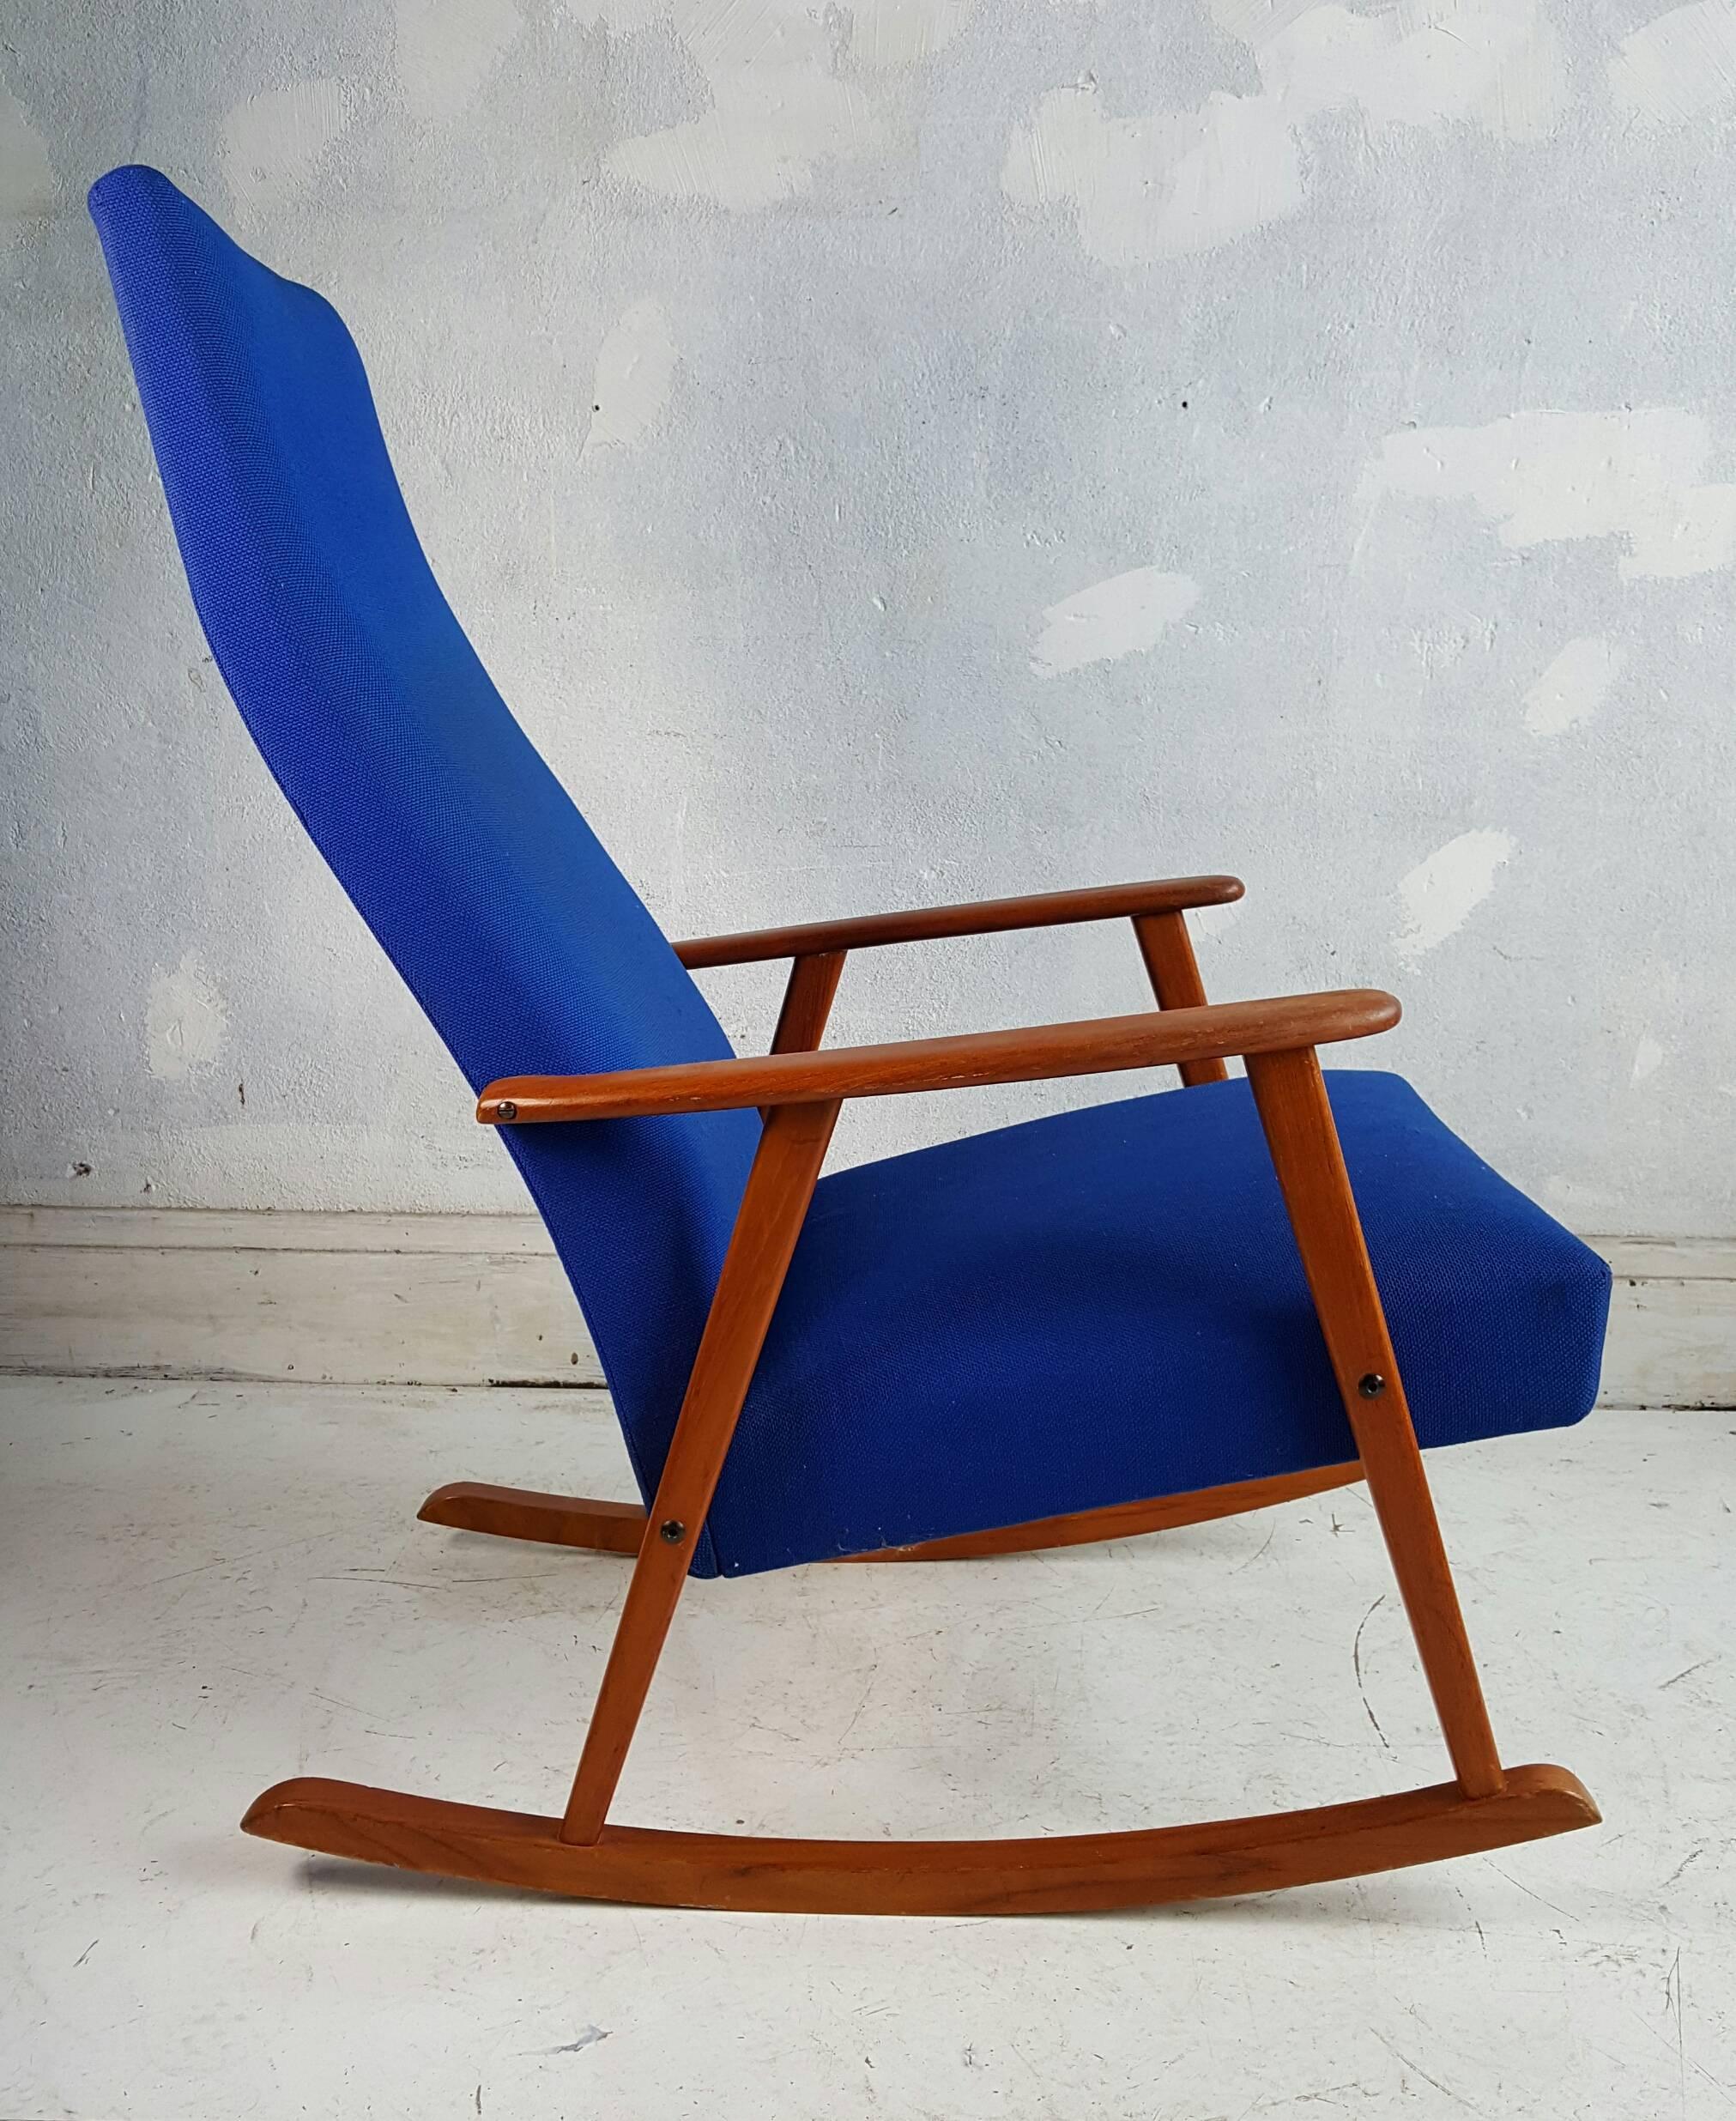 Mid-Century Modern Danish Rocking Chair. Teak wood construction, retains original electric blue wool fabric. Extremely comfortable, Classic styling.